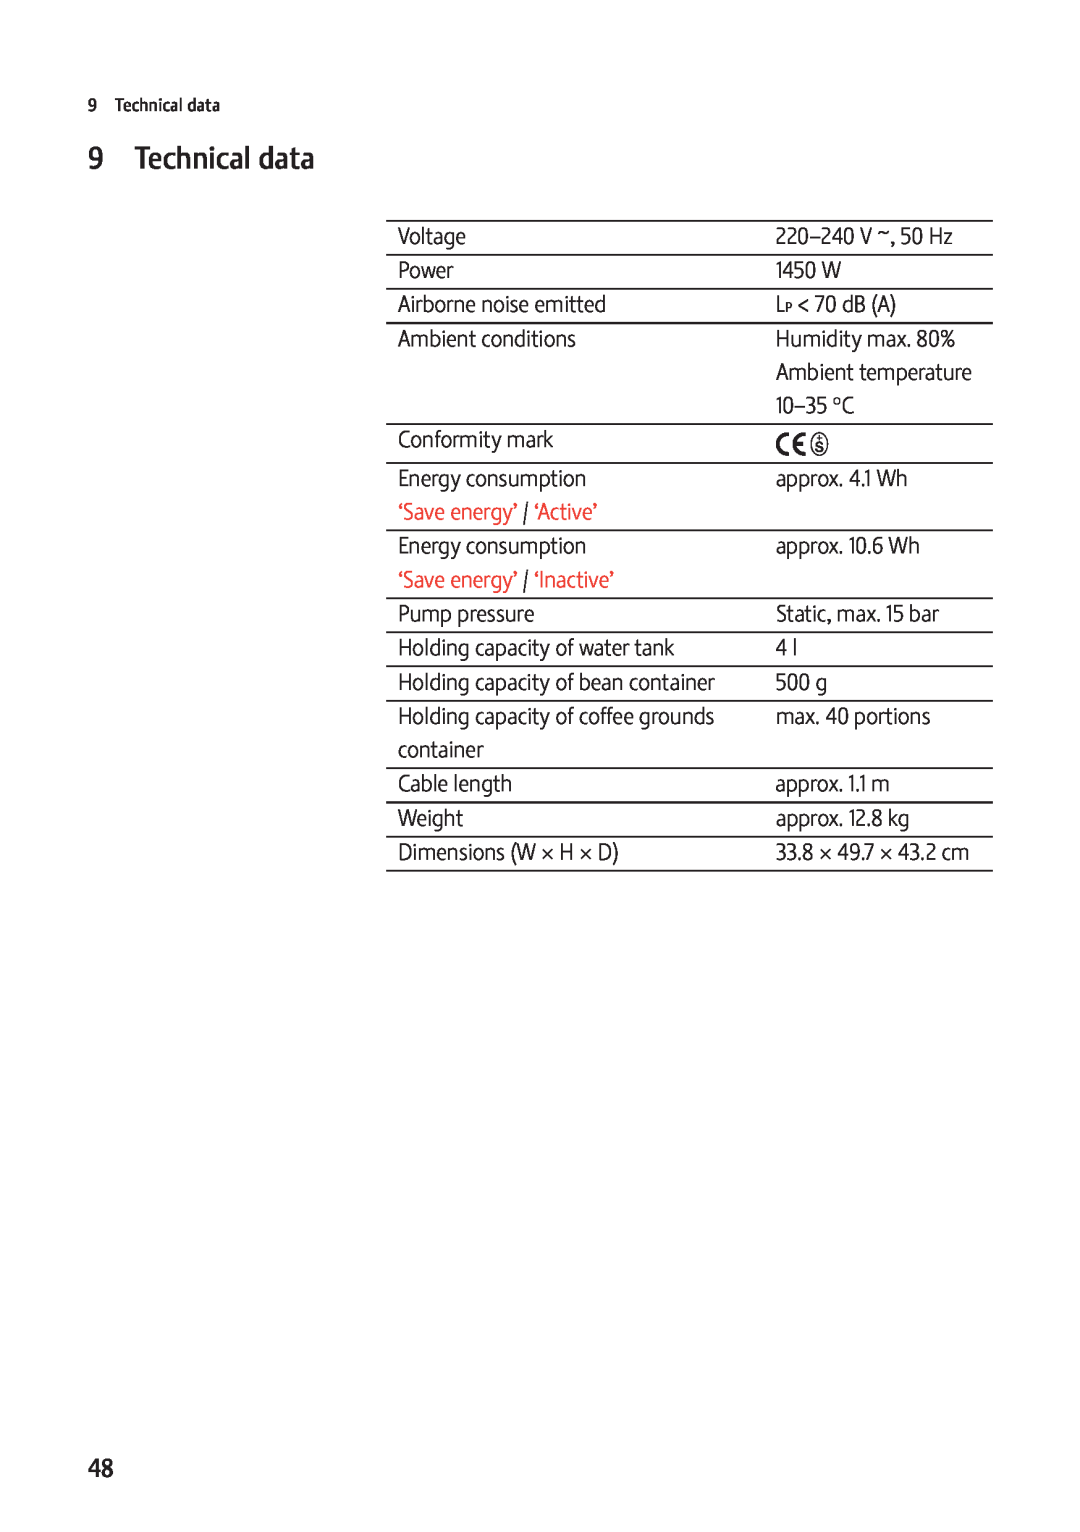 Jura Capresso 13637 manual 9Technical data, ‘Save energy’ / ‘Active’, ‘Save energy’ / ‘Inactive’ 